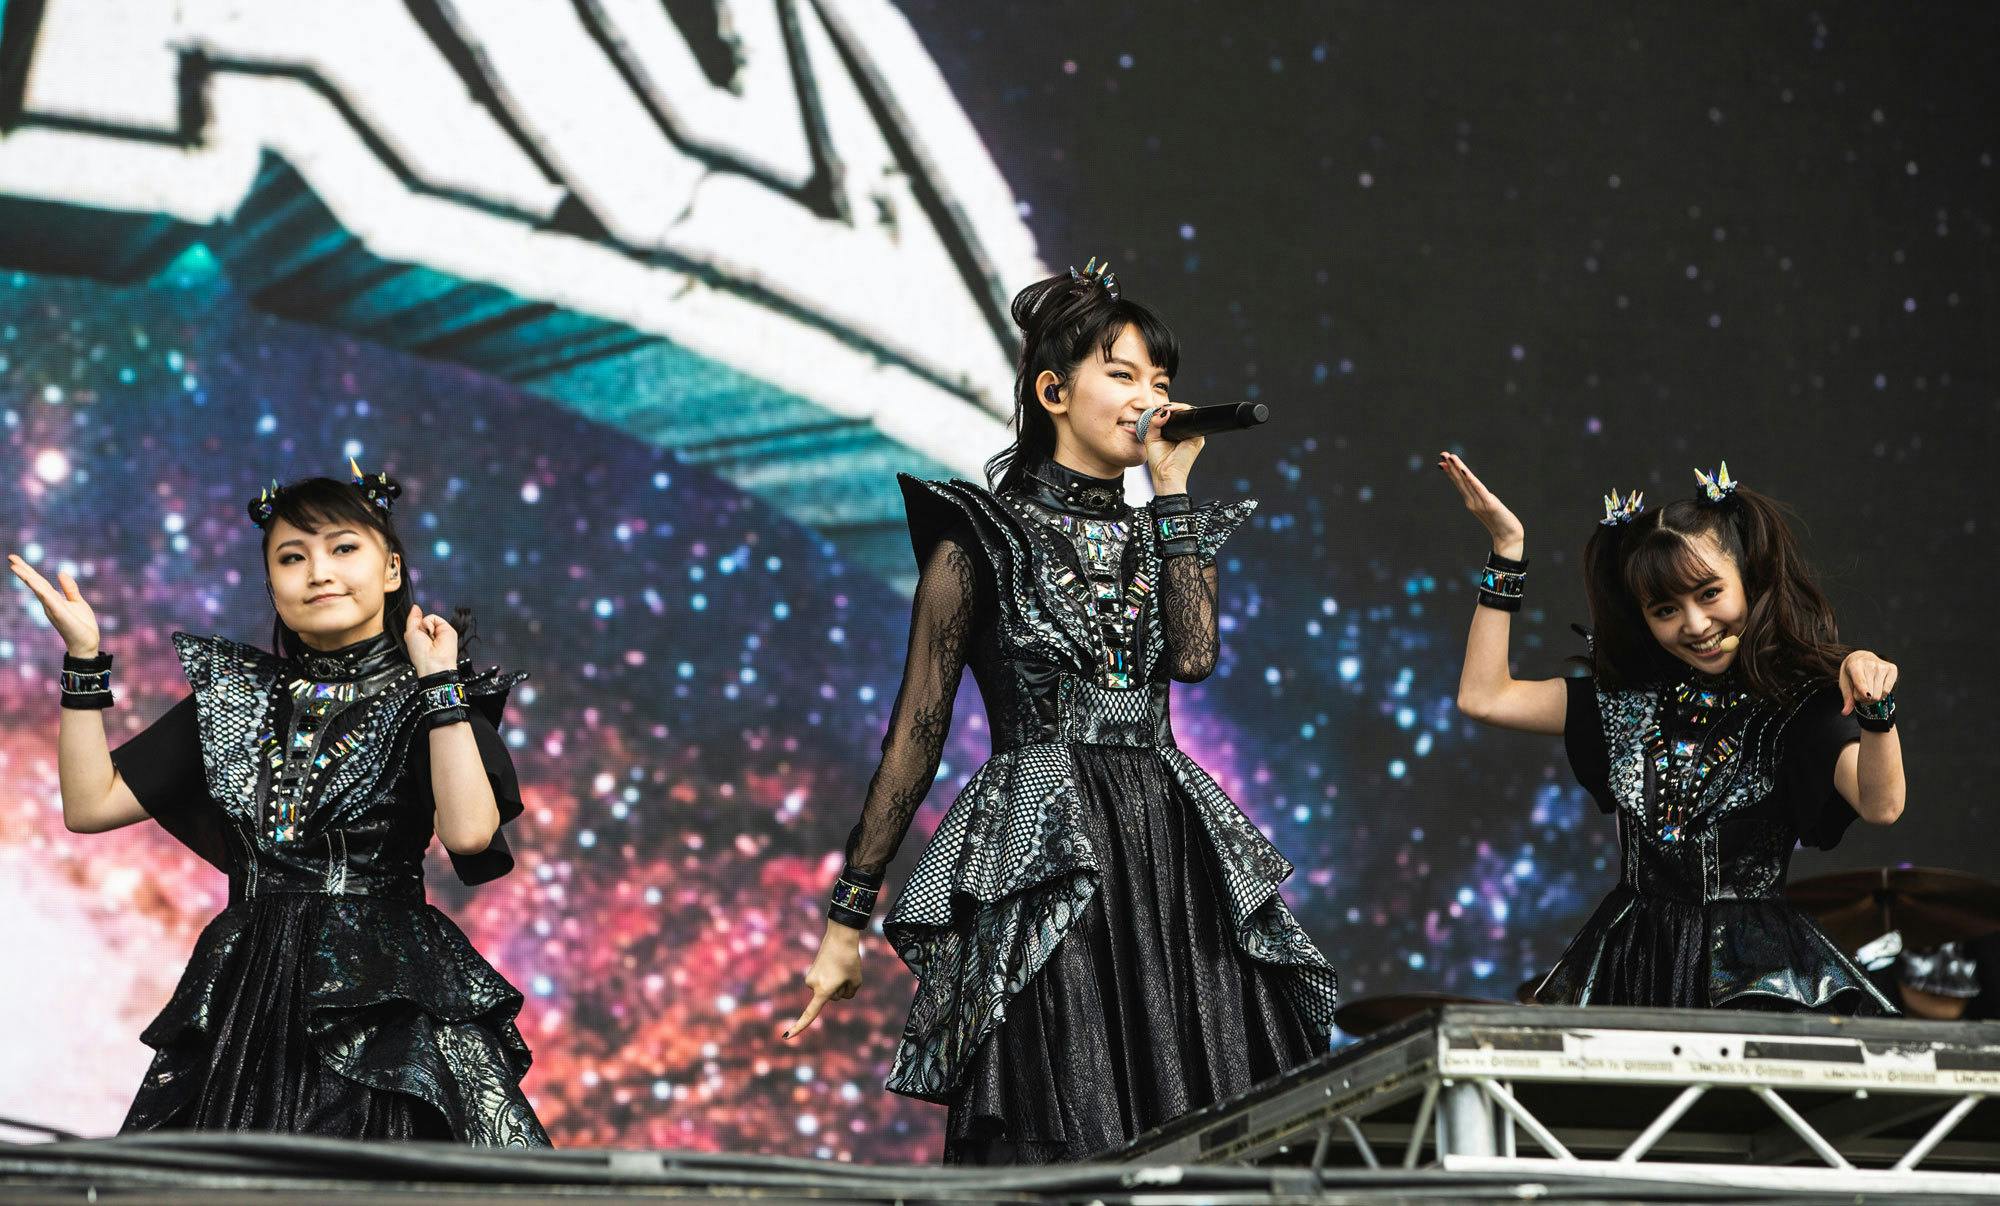 This Is The Setlist From The First Night Of BABYMETAL's UK Tour